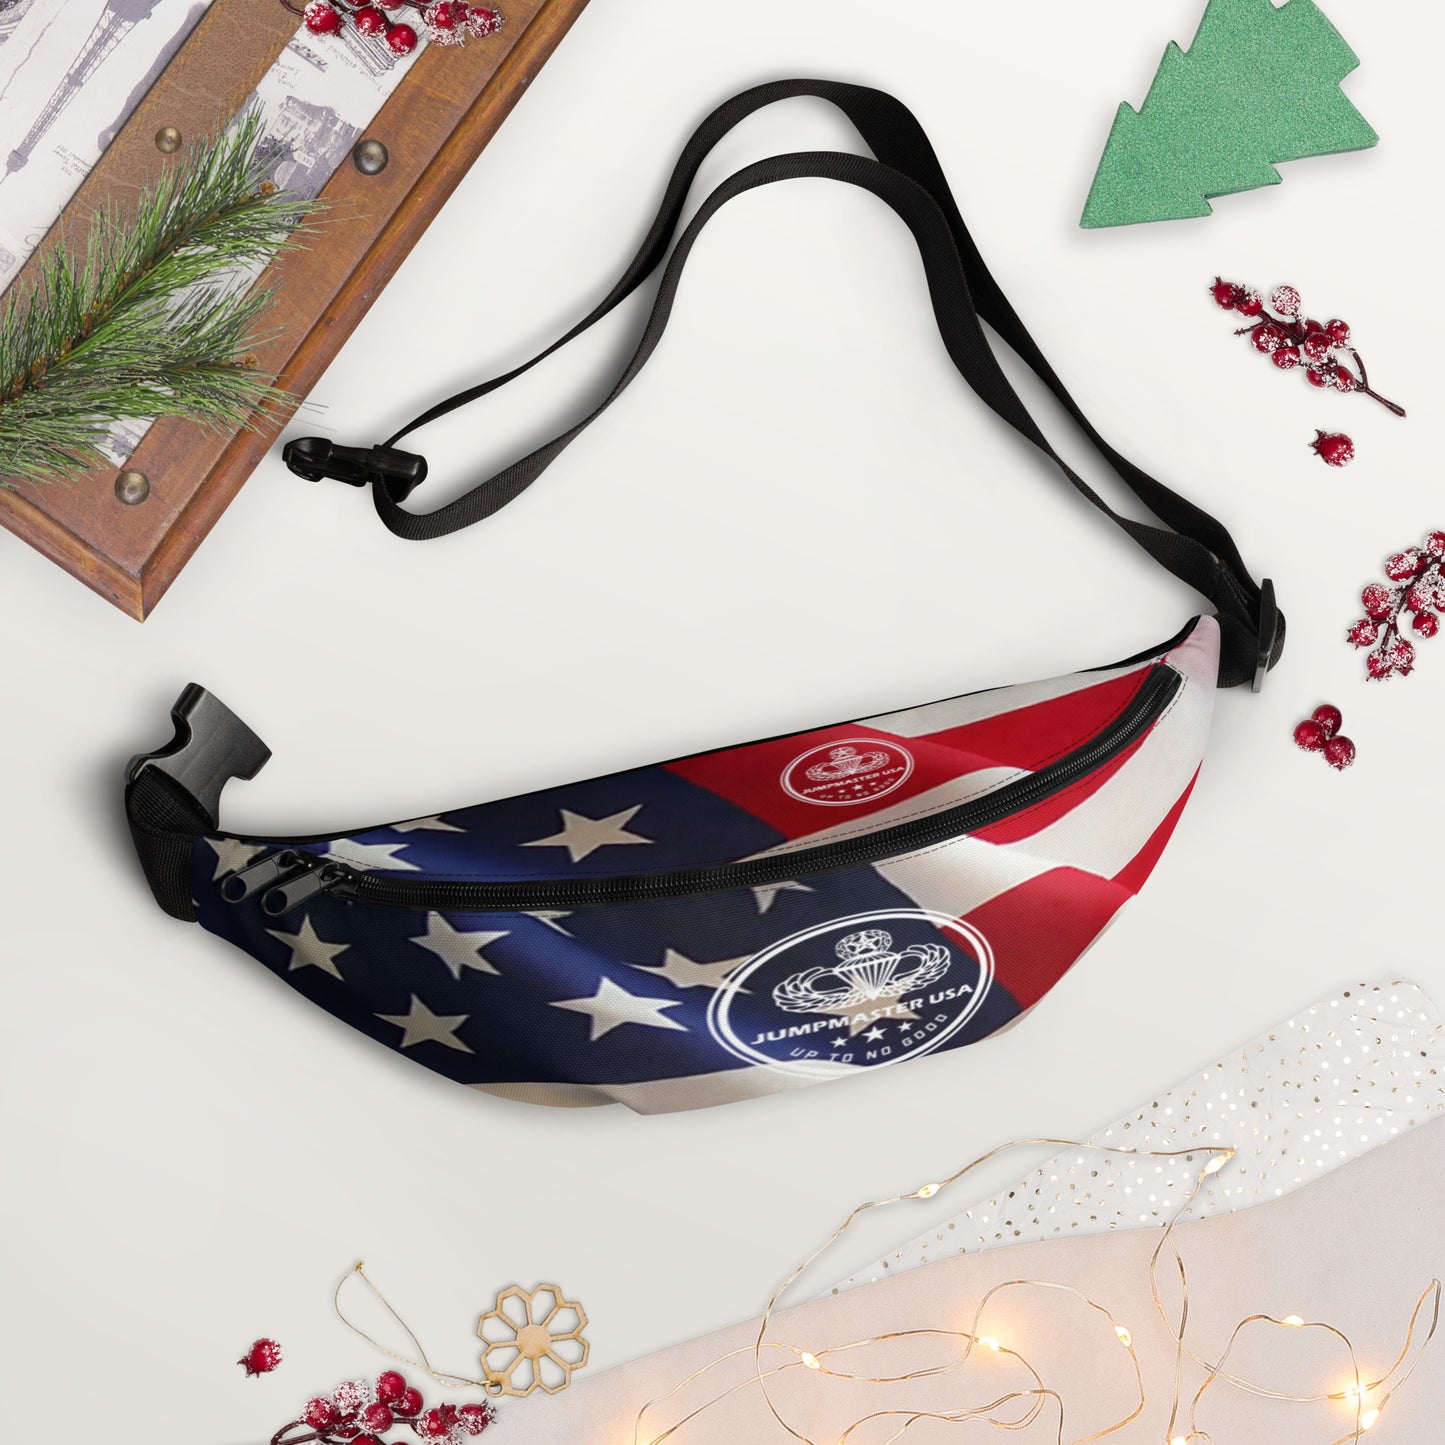 This Fanny pack is the ultimate accessory for stylish Jumpmasters on the go. This waist bag has everything—the right size, a small inside pocket, and adjustable straps—to become your favorite fashion item if you're going to a festival, getting ready for a vacation, or just like to keep your hands free.